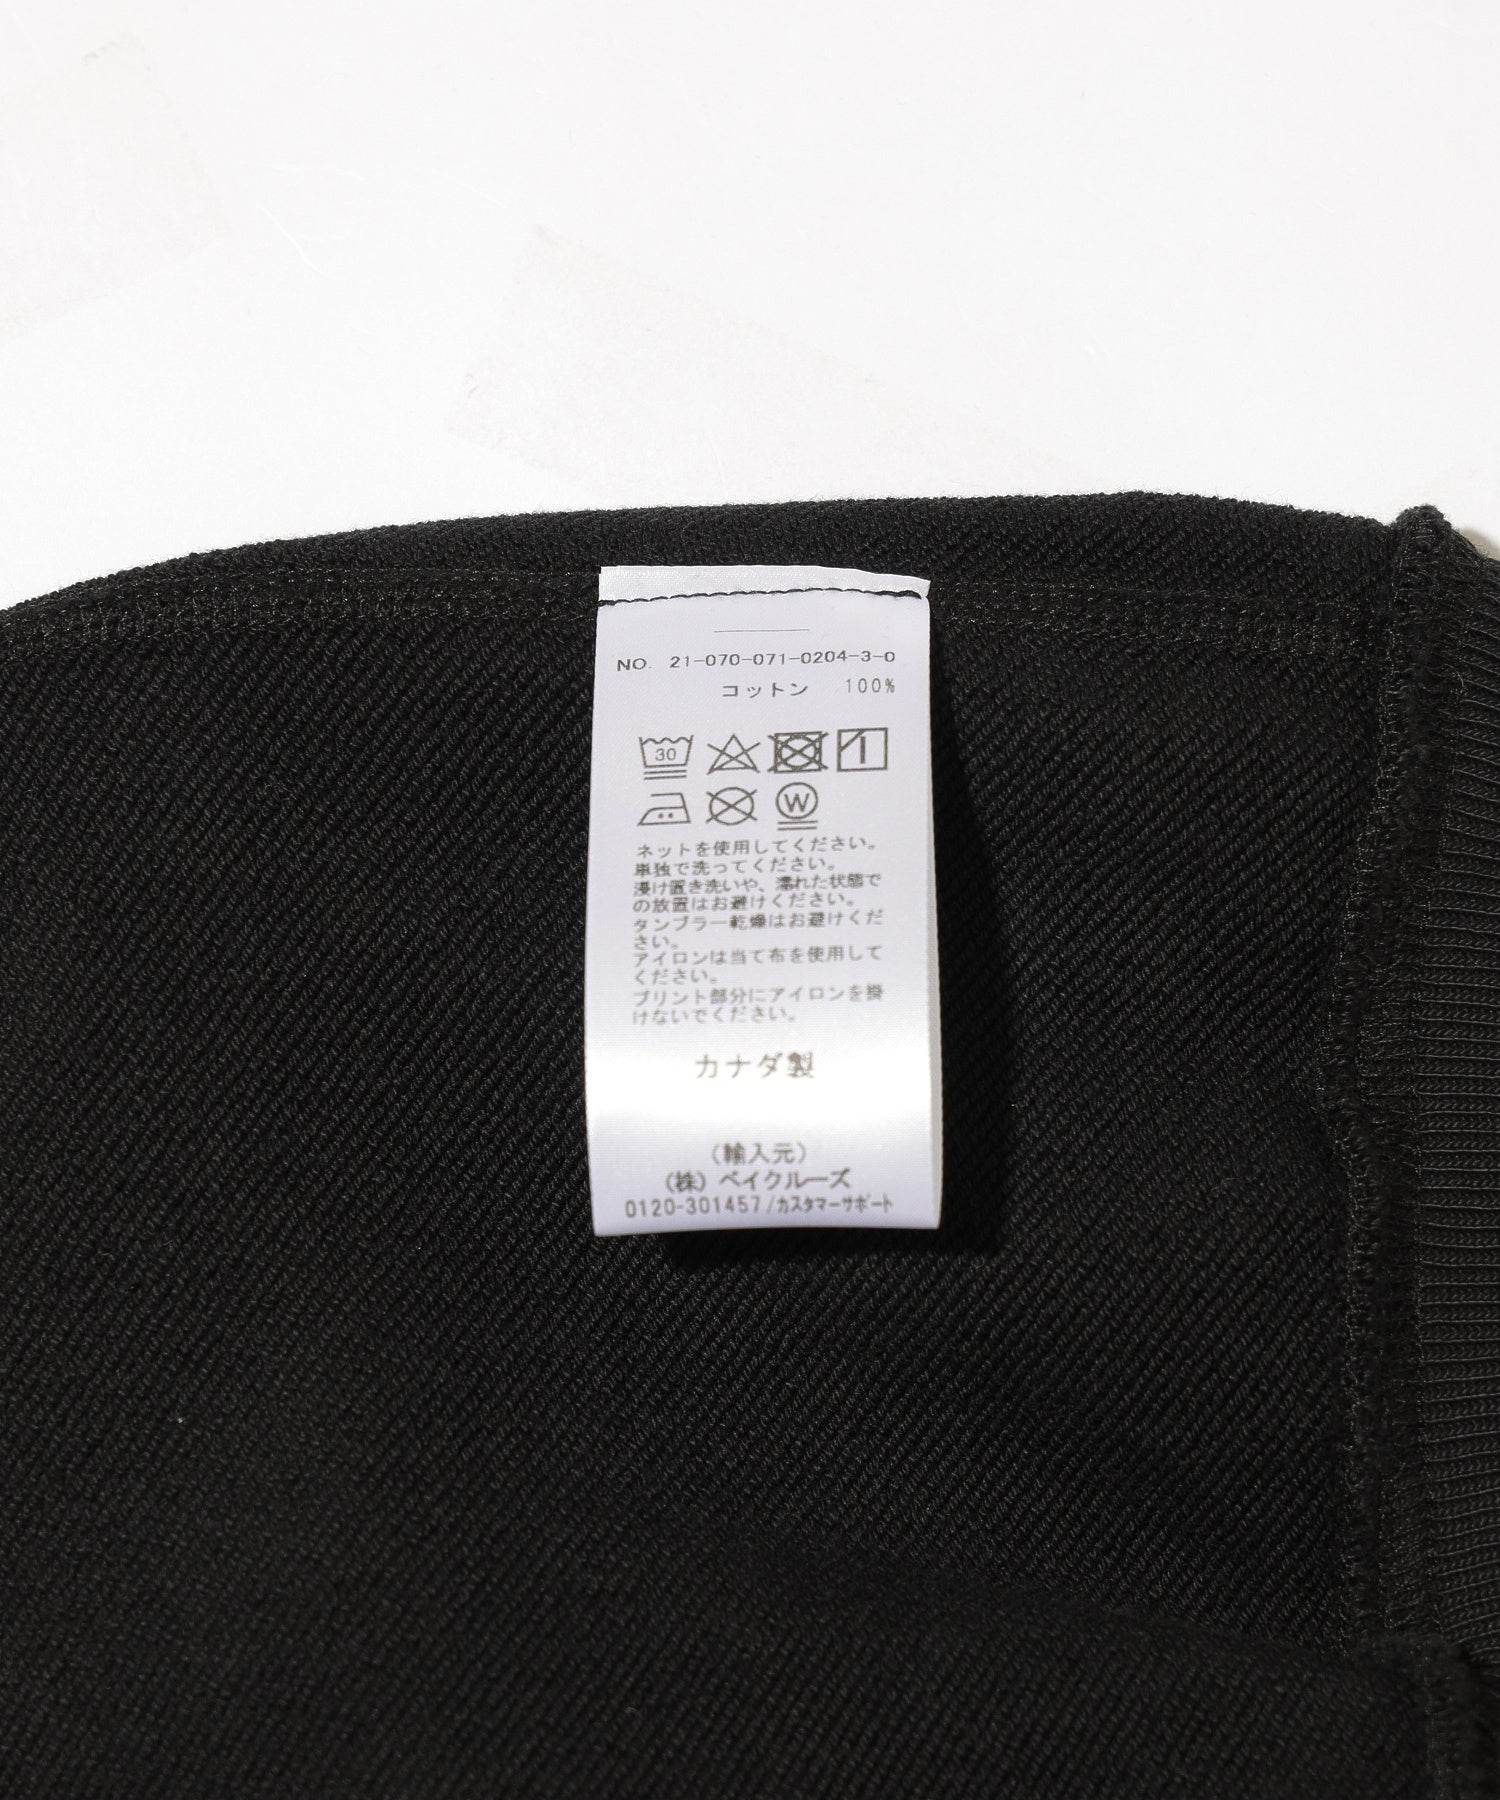 Reigning Champ/レイニングチャンプ/MIDWEIGHT TERRY RELAXED CREWNECK/RC-3718